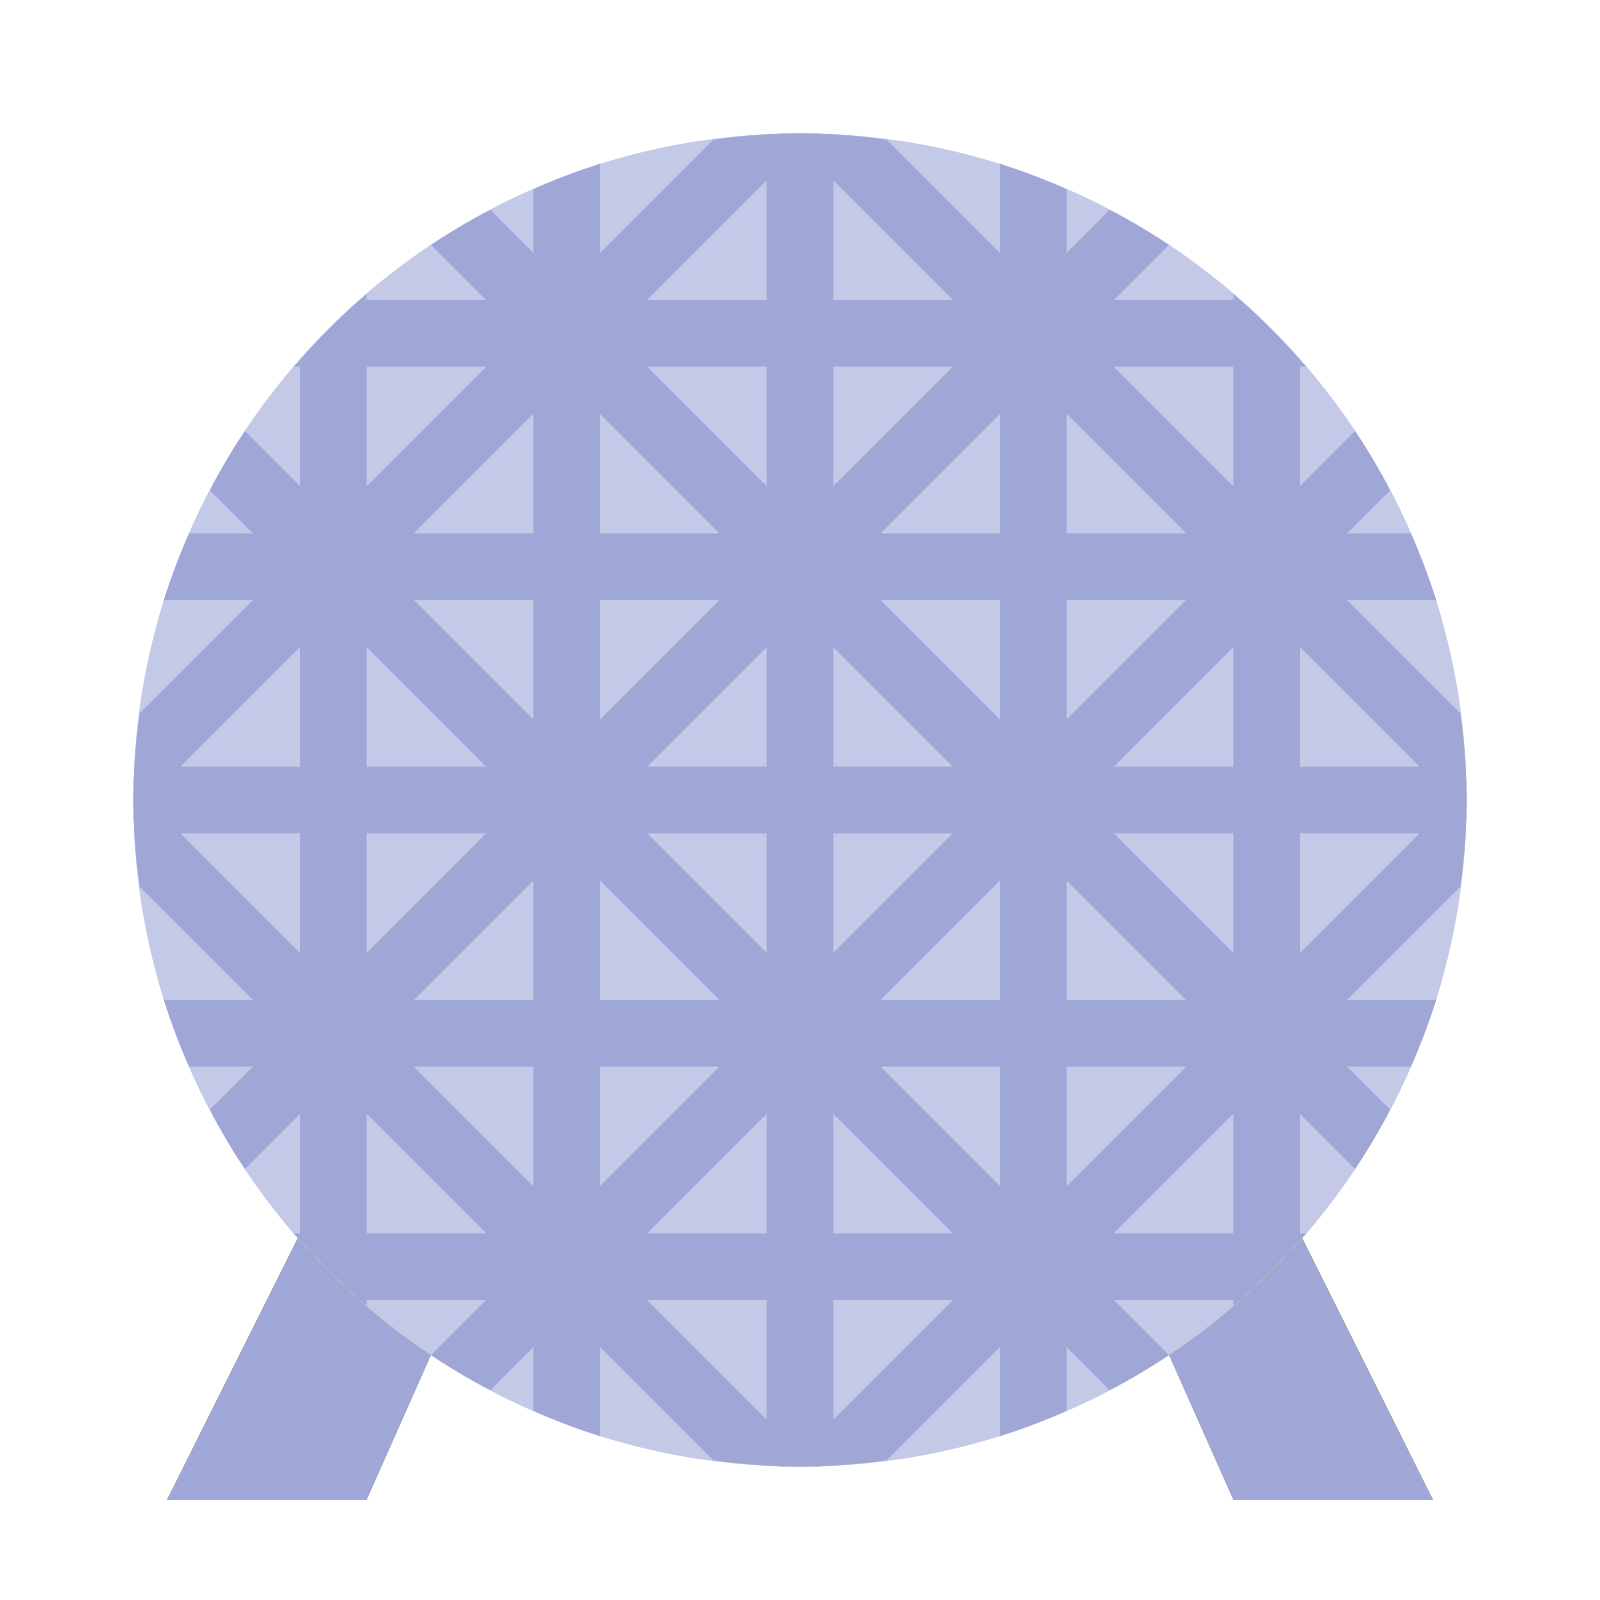 Spaceship epcot icon free. Earth vector png